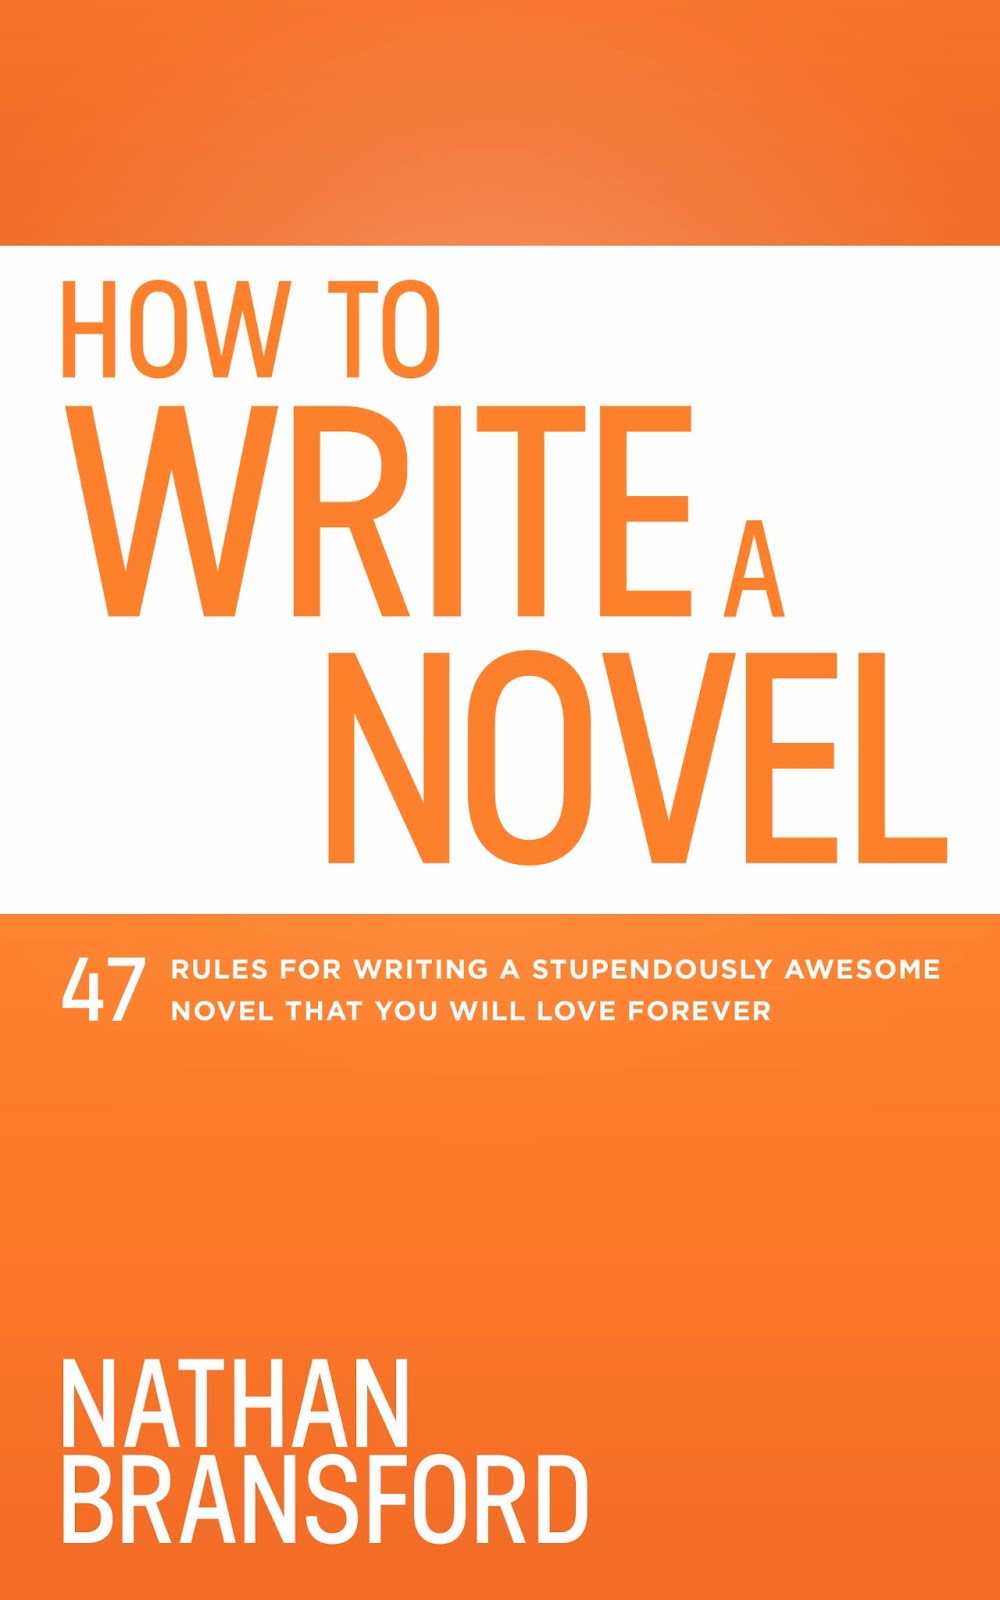 How to write a query letter for a book